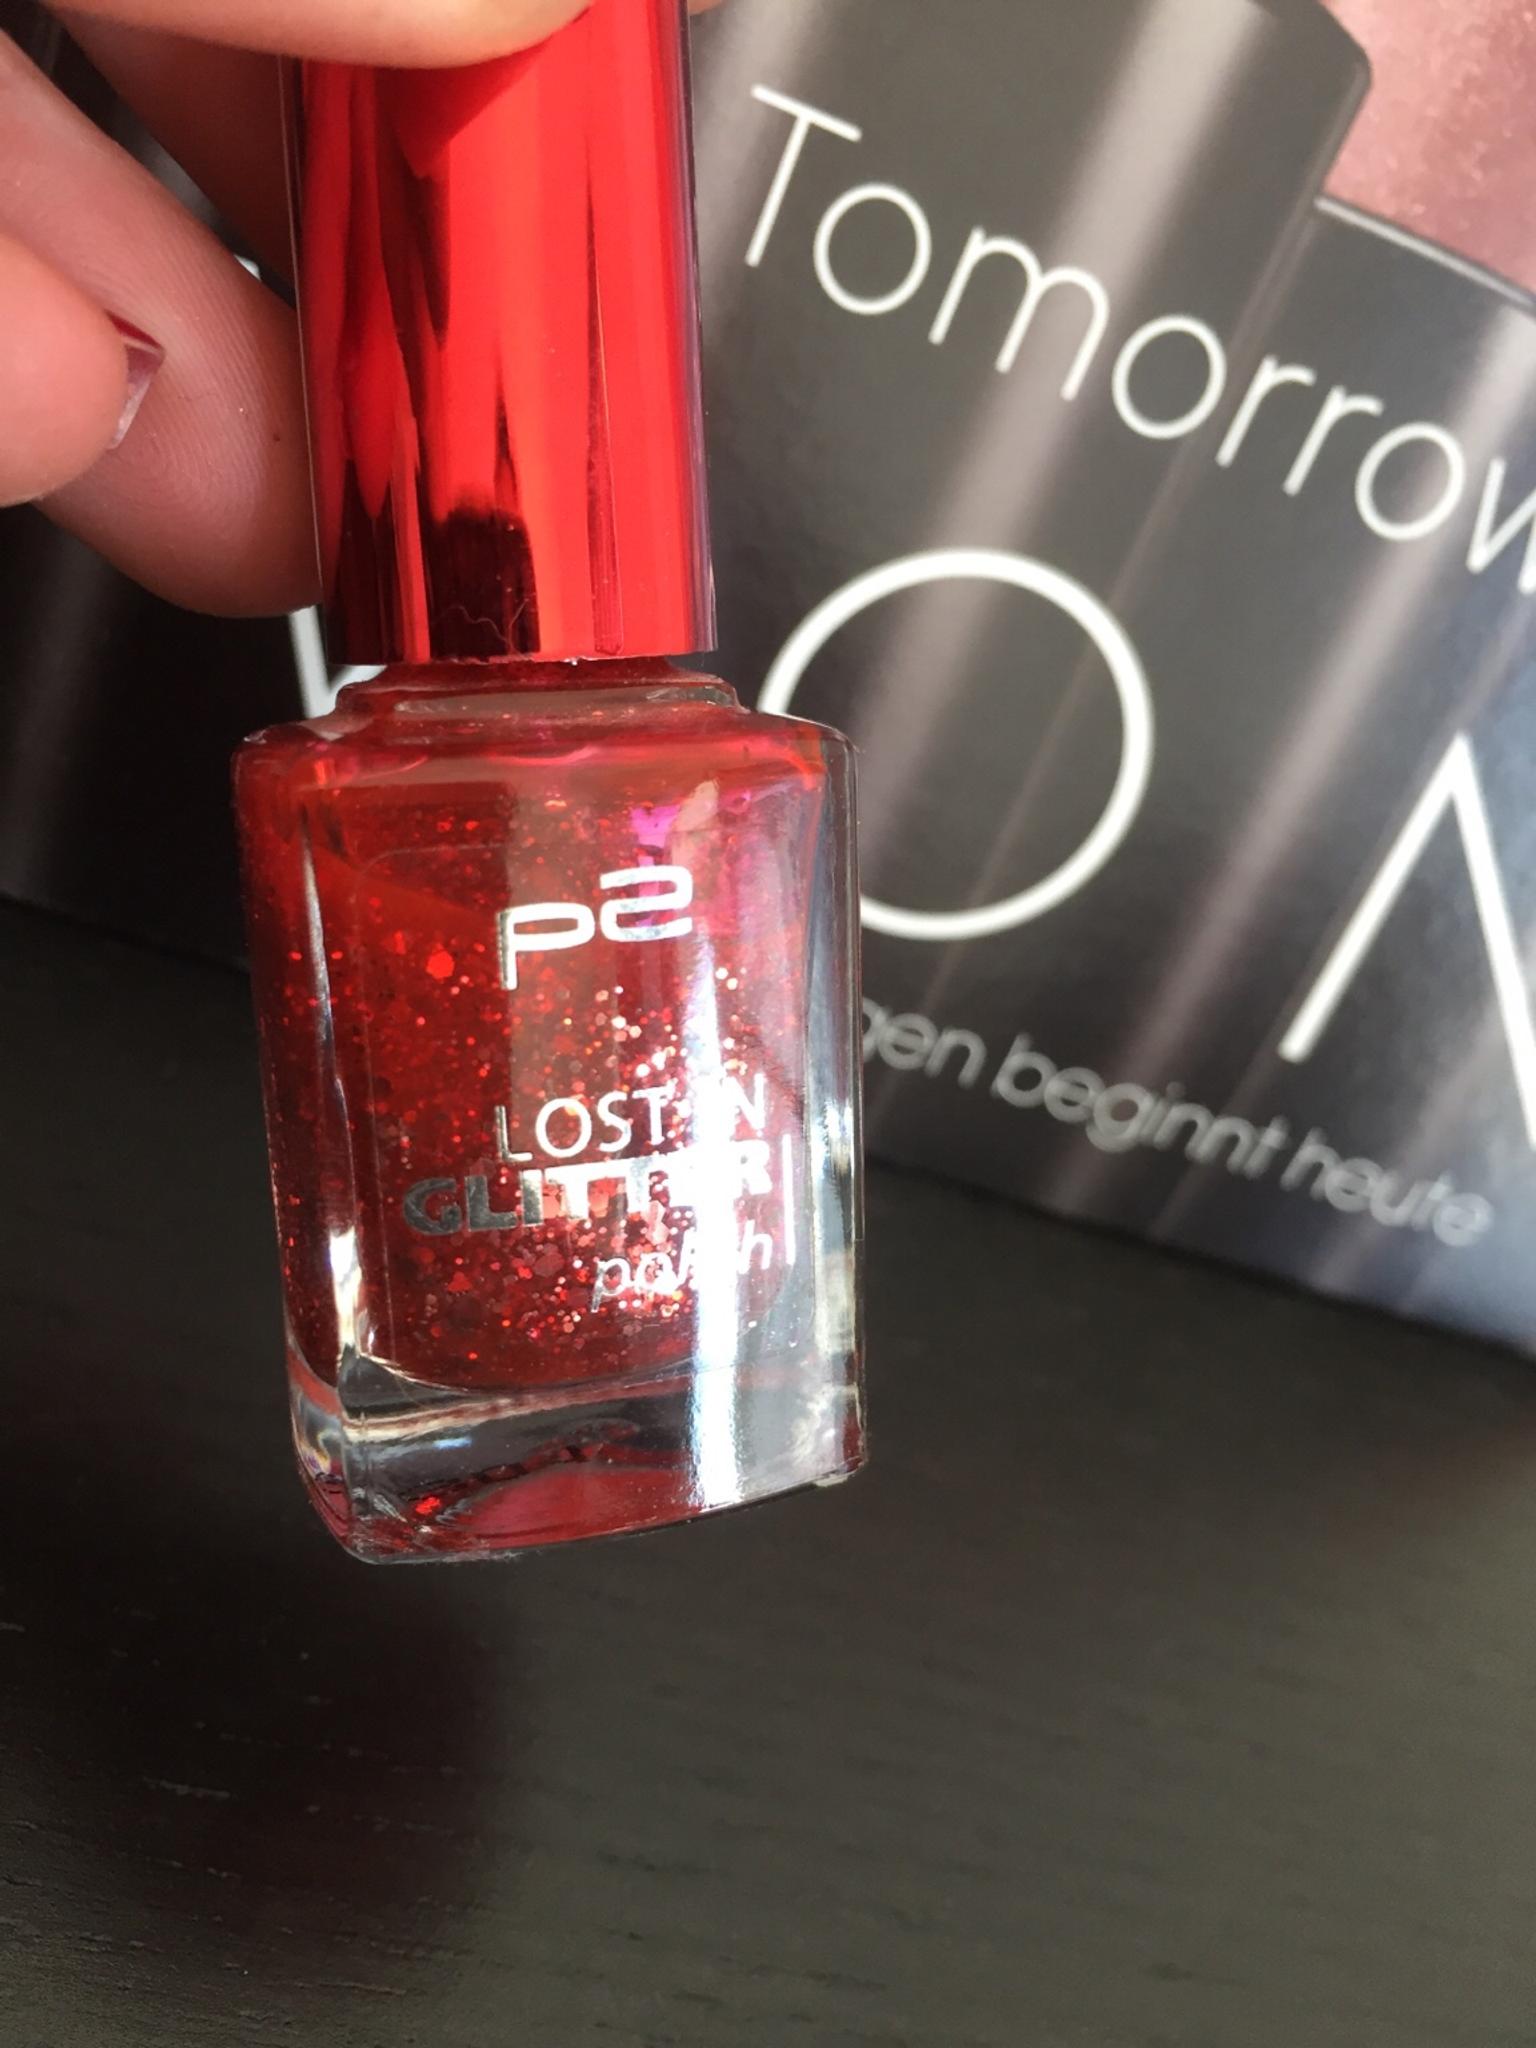 Nagellack P2 Glitzer Rot In Ellgau For 1 50 For Sale Shpock